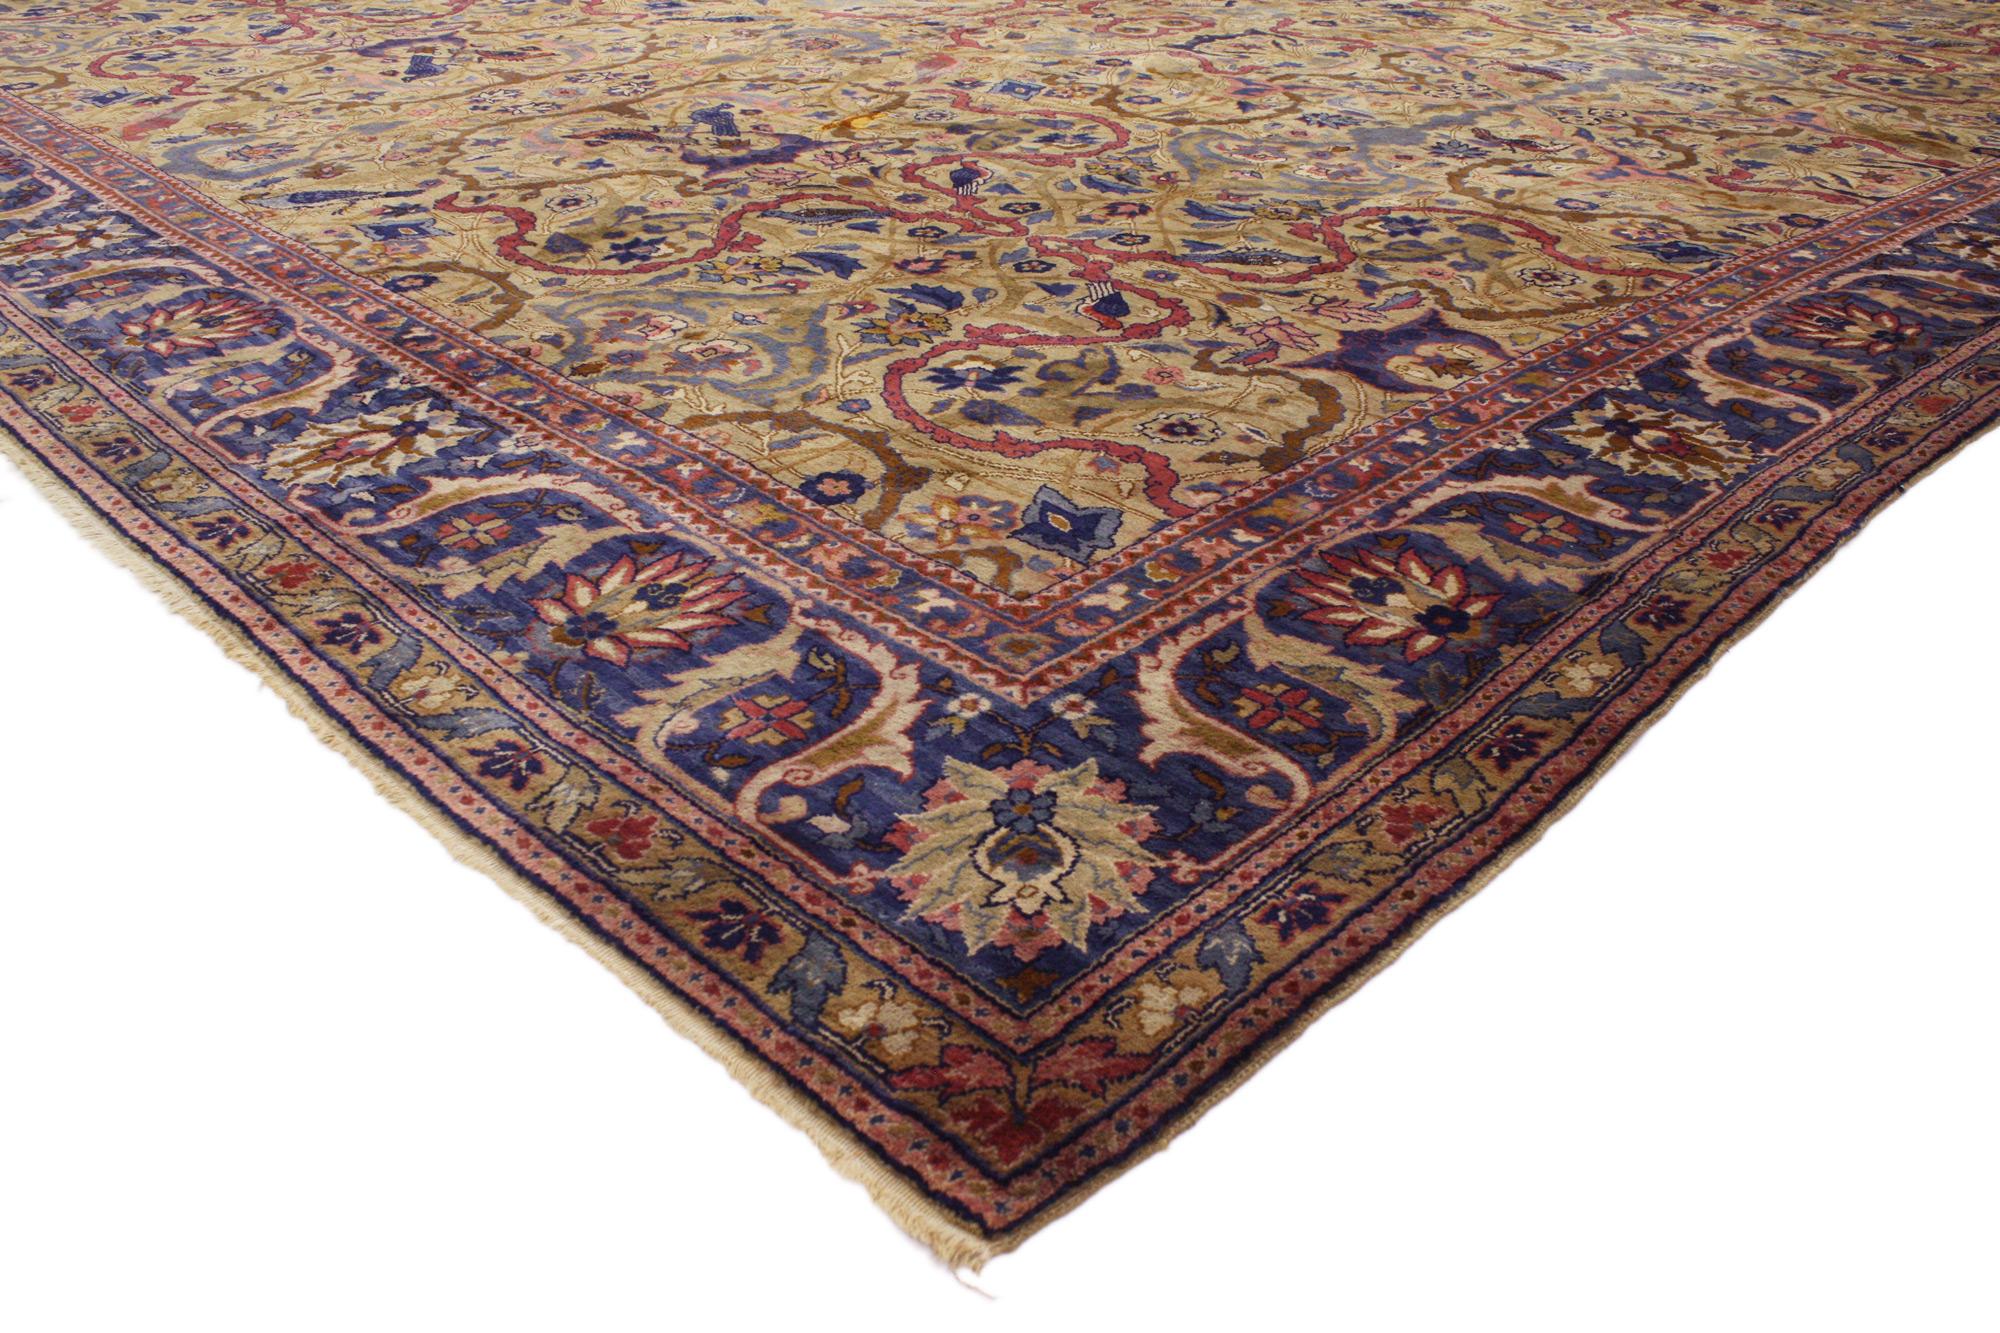 76918 Oversized Antique Indian Agra Rug, 23'00 x 23'07. 
Emulating timeless style with incredible detail and texture, this hand knotted wool oversized antique Indian Agra rug is a captivating vision of woven beauty. The intricate botanical design